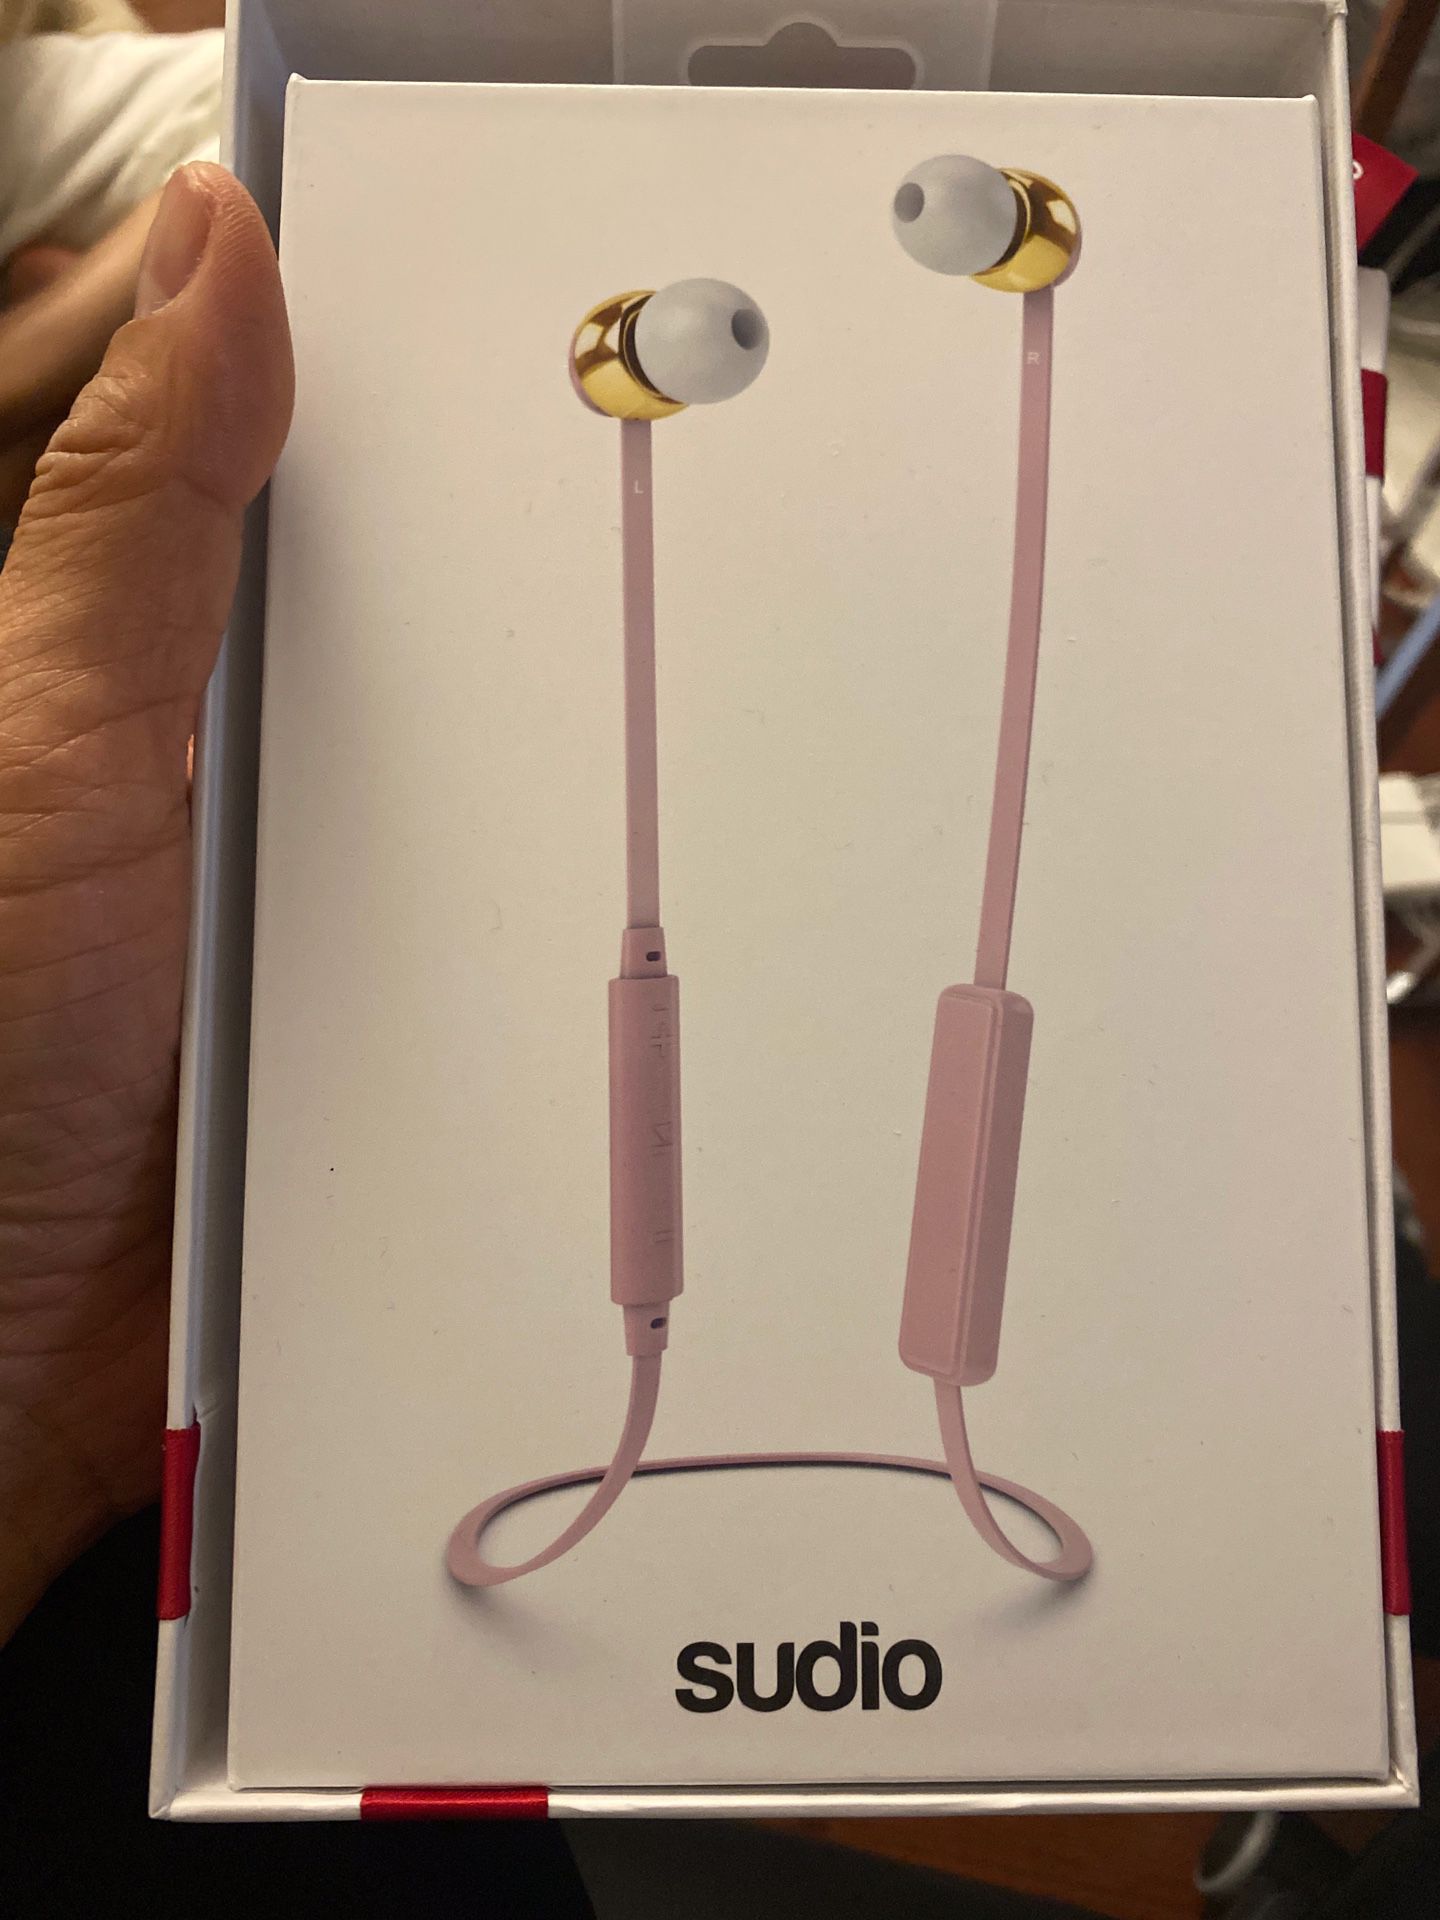 New Sudio Pink Bluetooth In-Ear Headphones with Mic